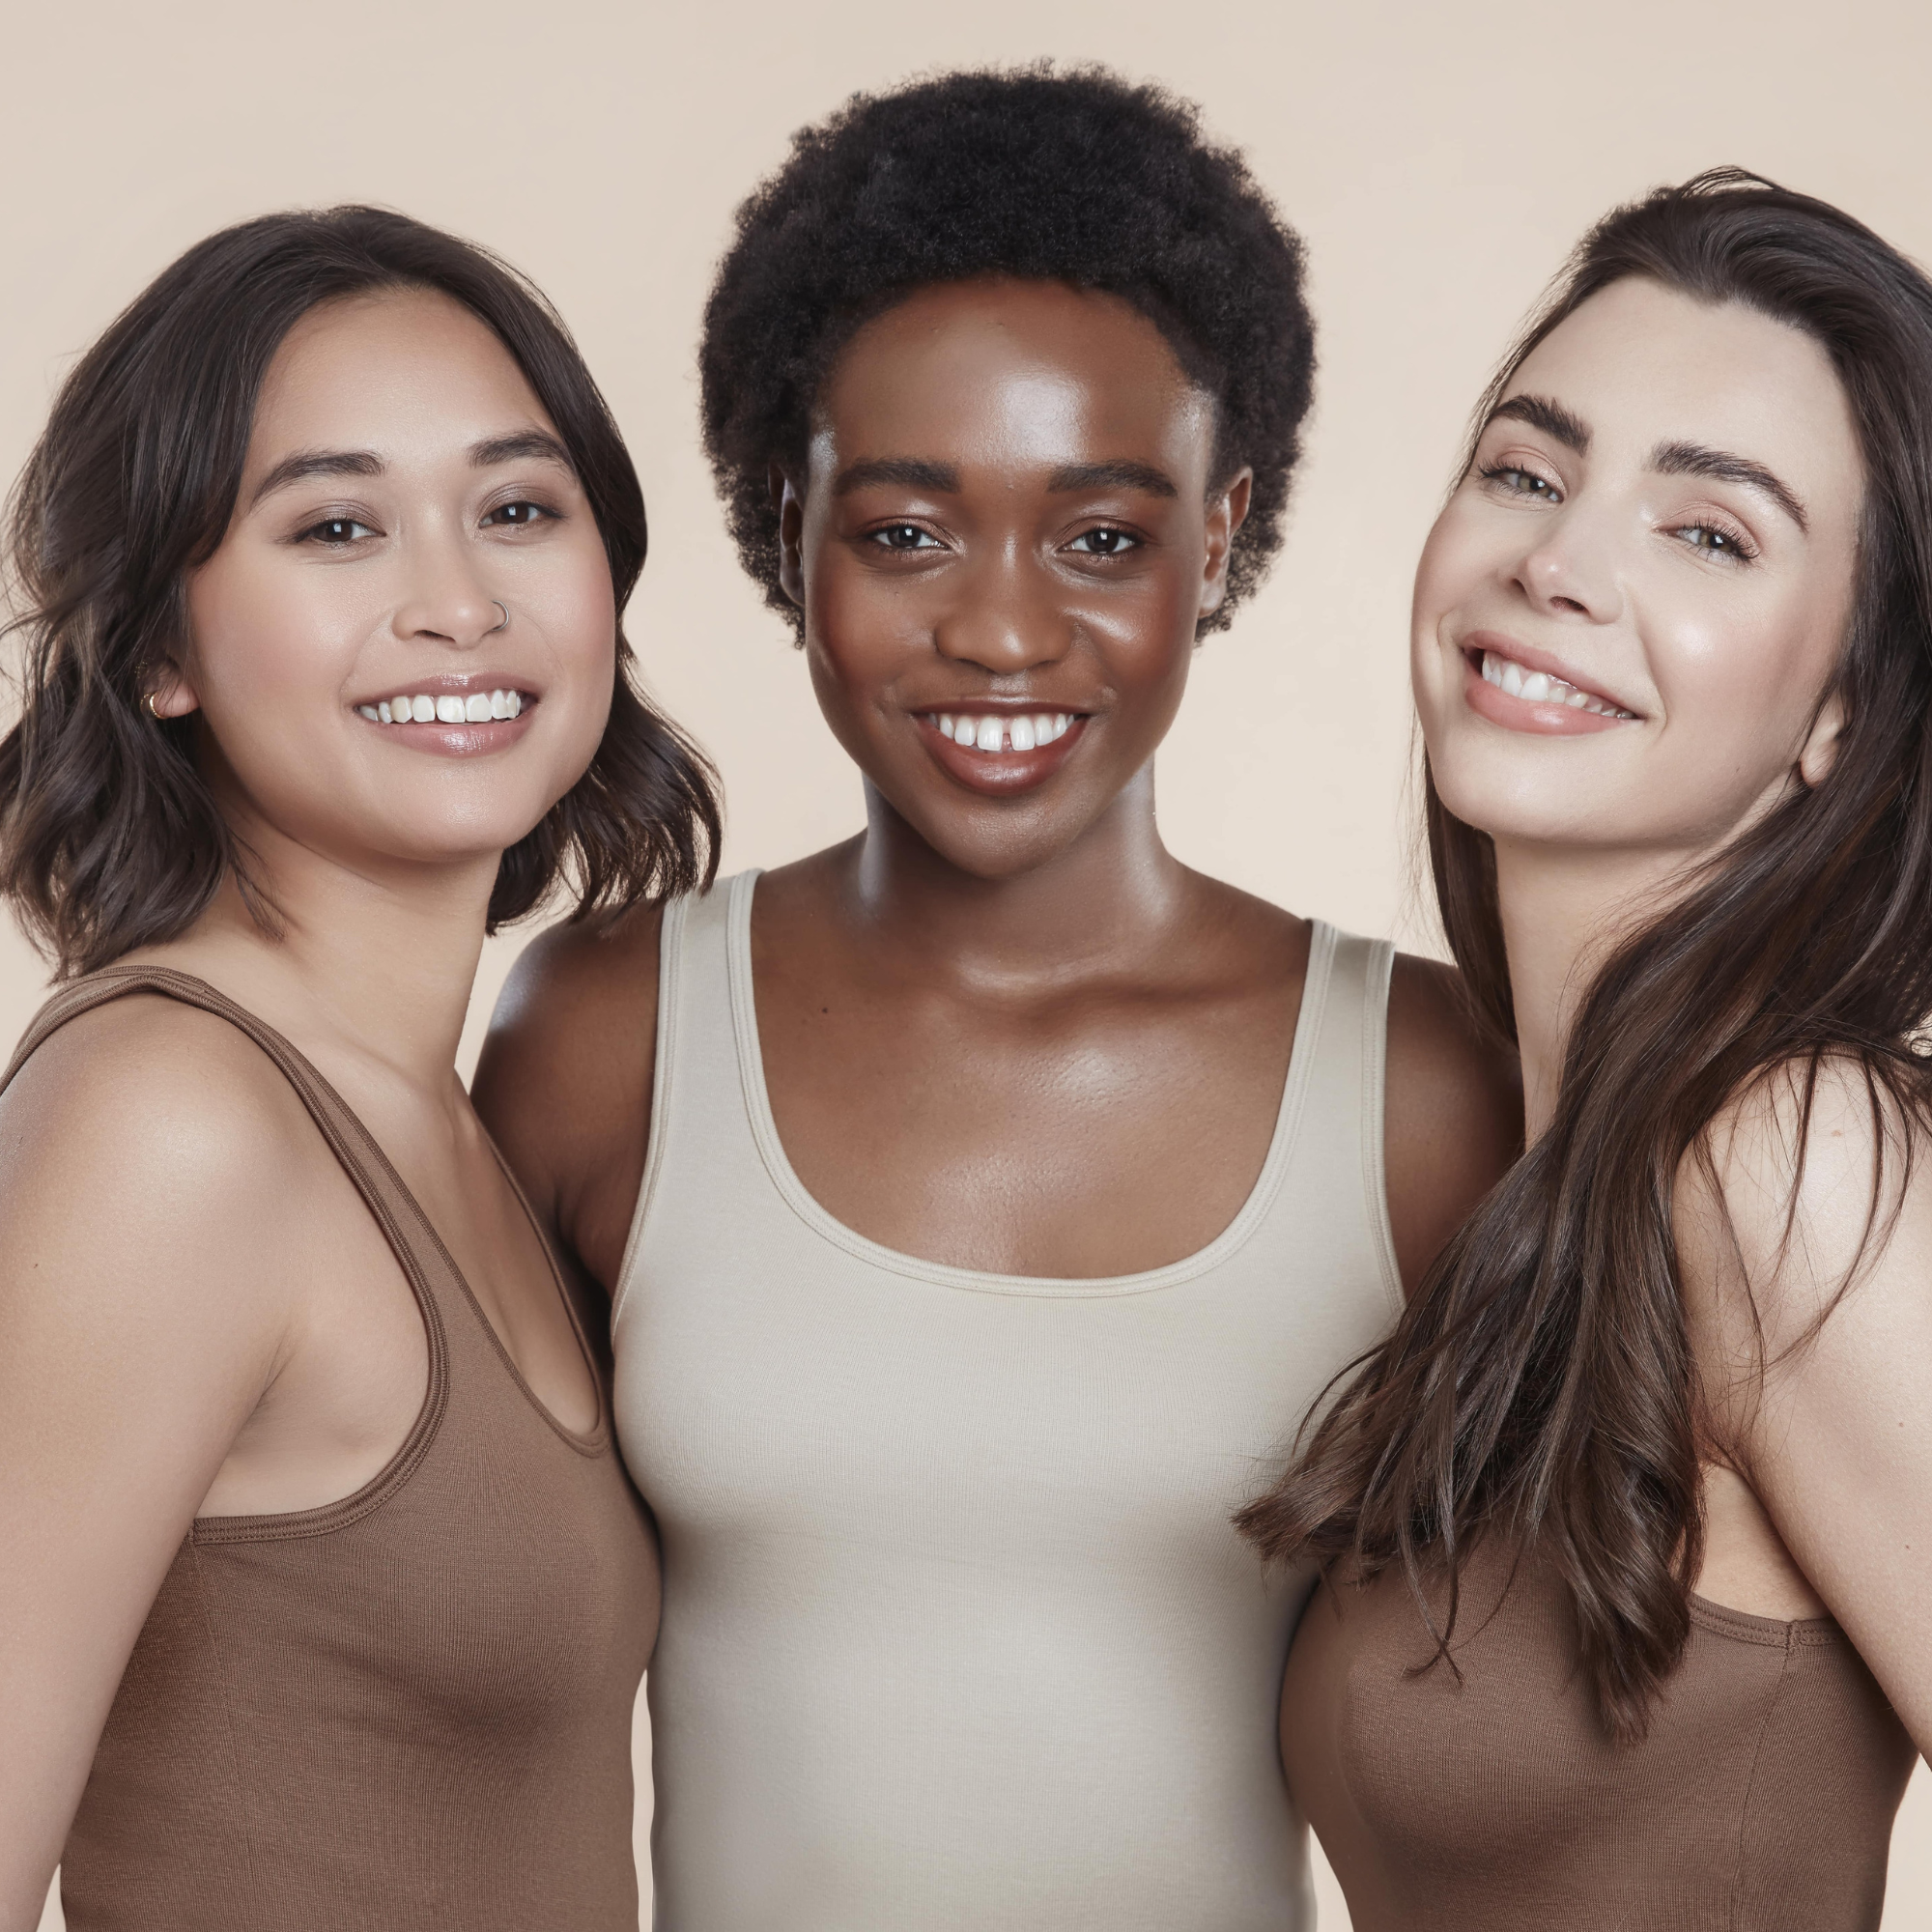 Image of three female models all looking at the camera. One has bob hair, the centre one has black textured natural hair and the thrid has long brunette hair. They are wearing neutral vest tops. Their skin is glowing and thier hair is healthy and shiny.